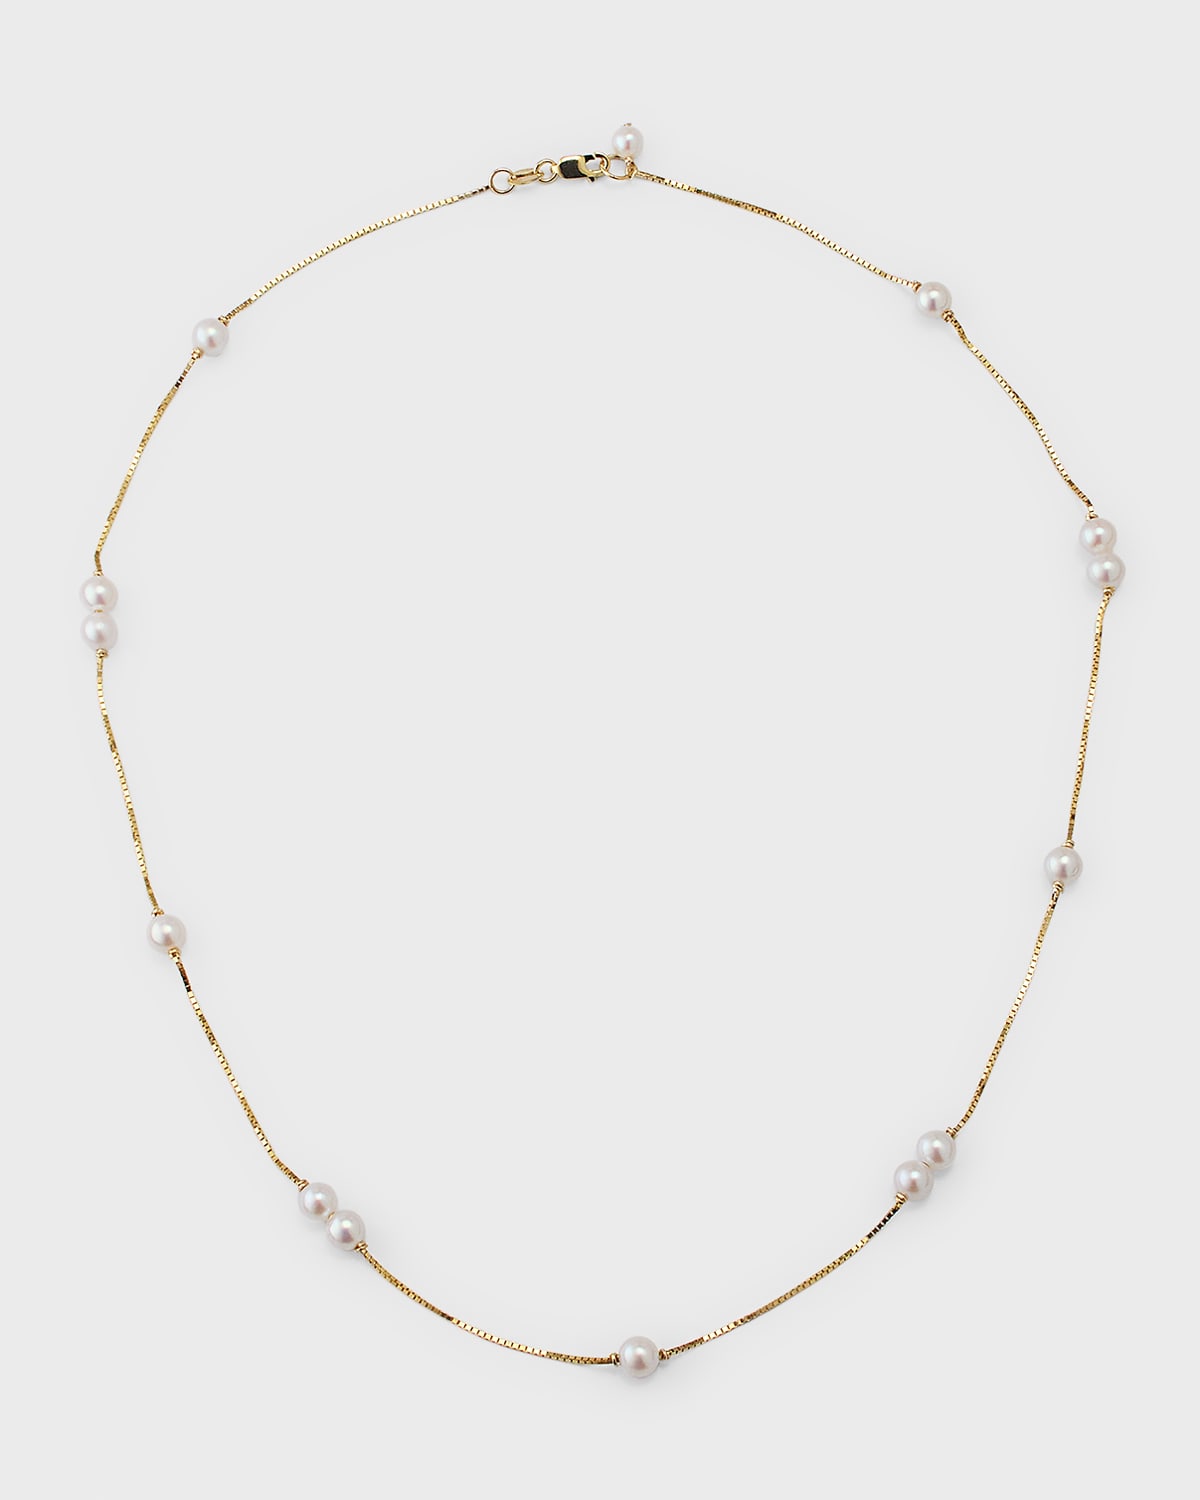 POPPY FINCH 14K YELLOW GOLD SPACED PEARL BOX CHAIN NECKLACE